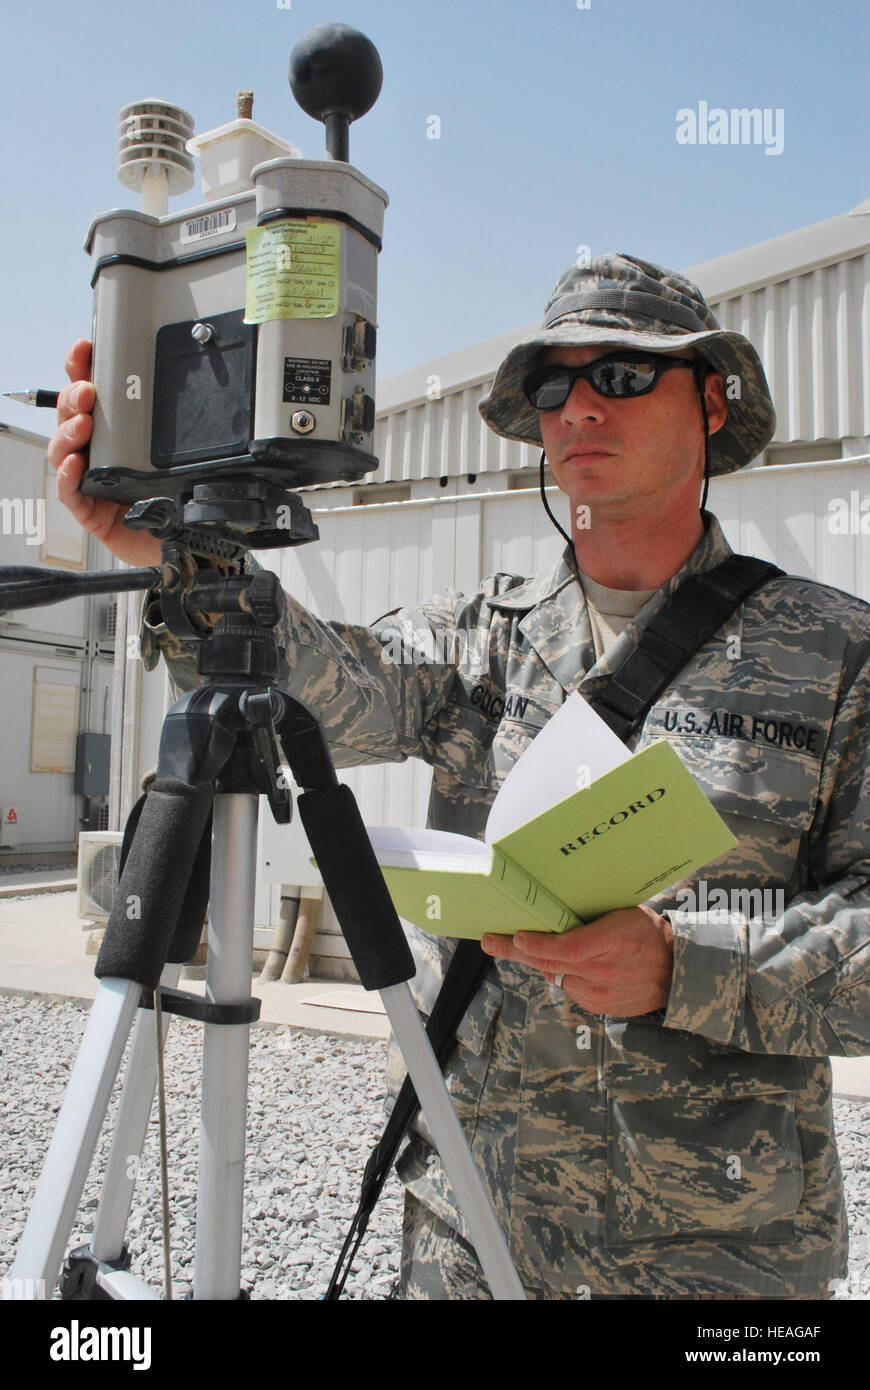 Tech. Sgt. James Glickman monitors the wet bulb globe temperature heat stress readings Aug. 18 at Kandahar Airfield, Afghanistan. Sergeant Glickman is a bioenvironmental engineering craftsman assigned to the 451st AEW Clinic.  Senior Airman Melissa B. White Stock Photo